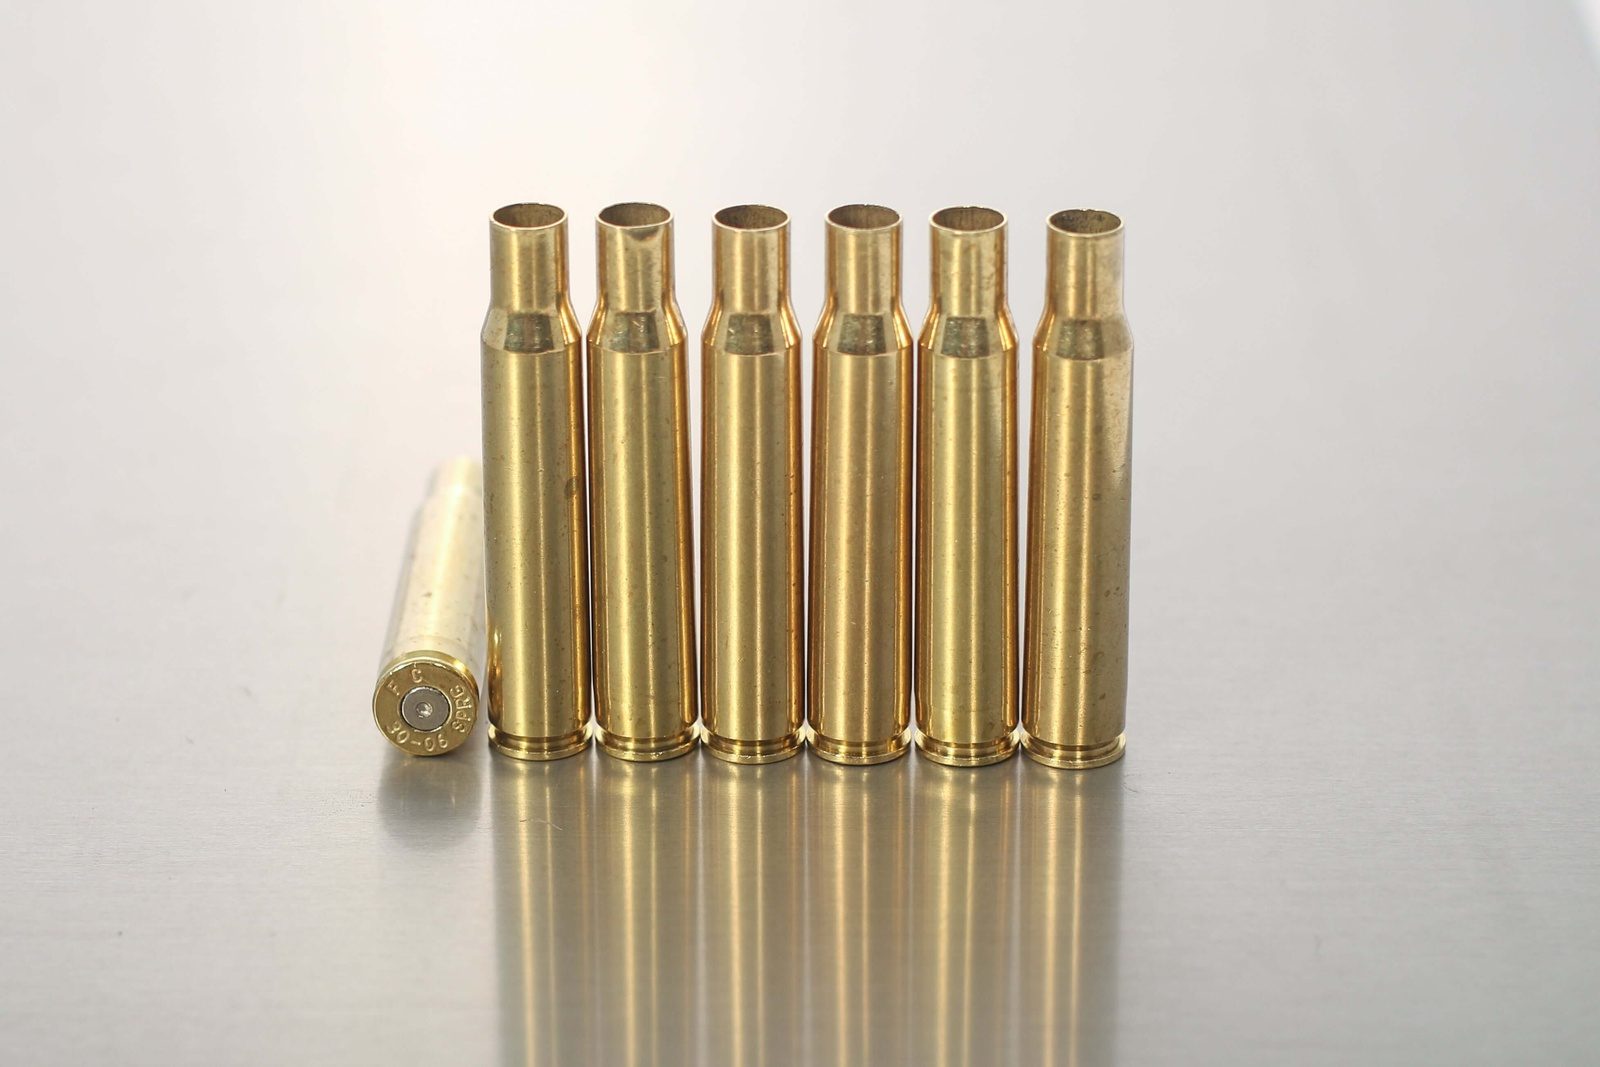 Top Brass : Once-Fired Military Brass, Bullets, Storage